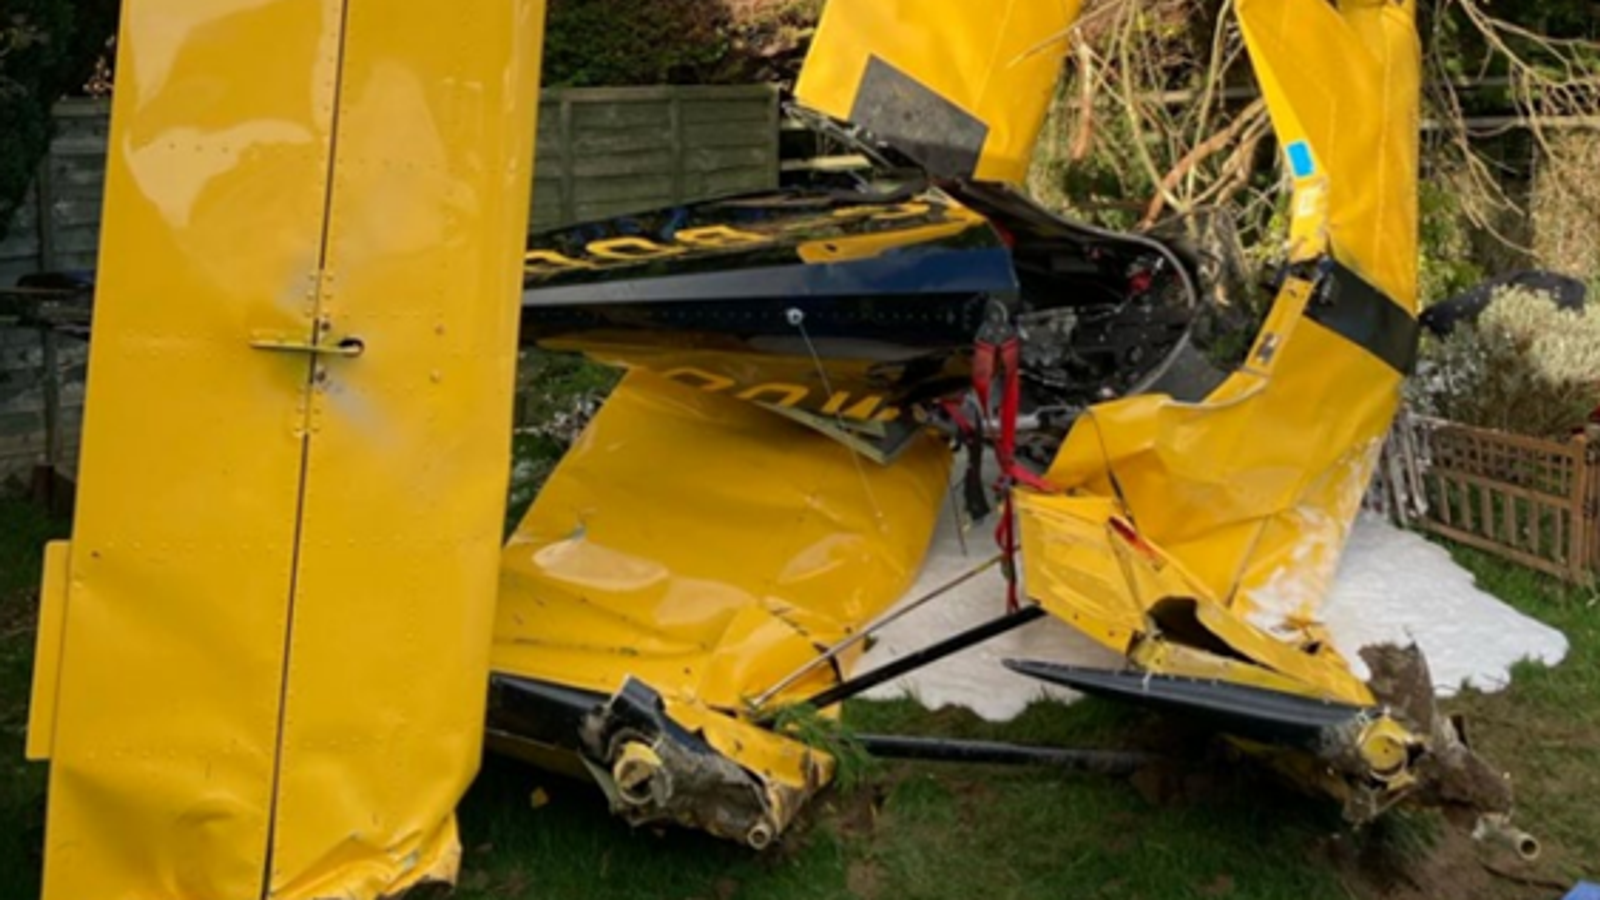 Anglesey: Plane crash-landed in back garden after 'engine failure'